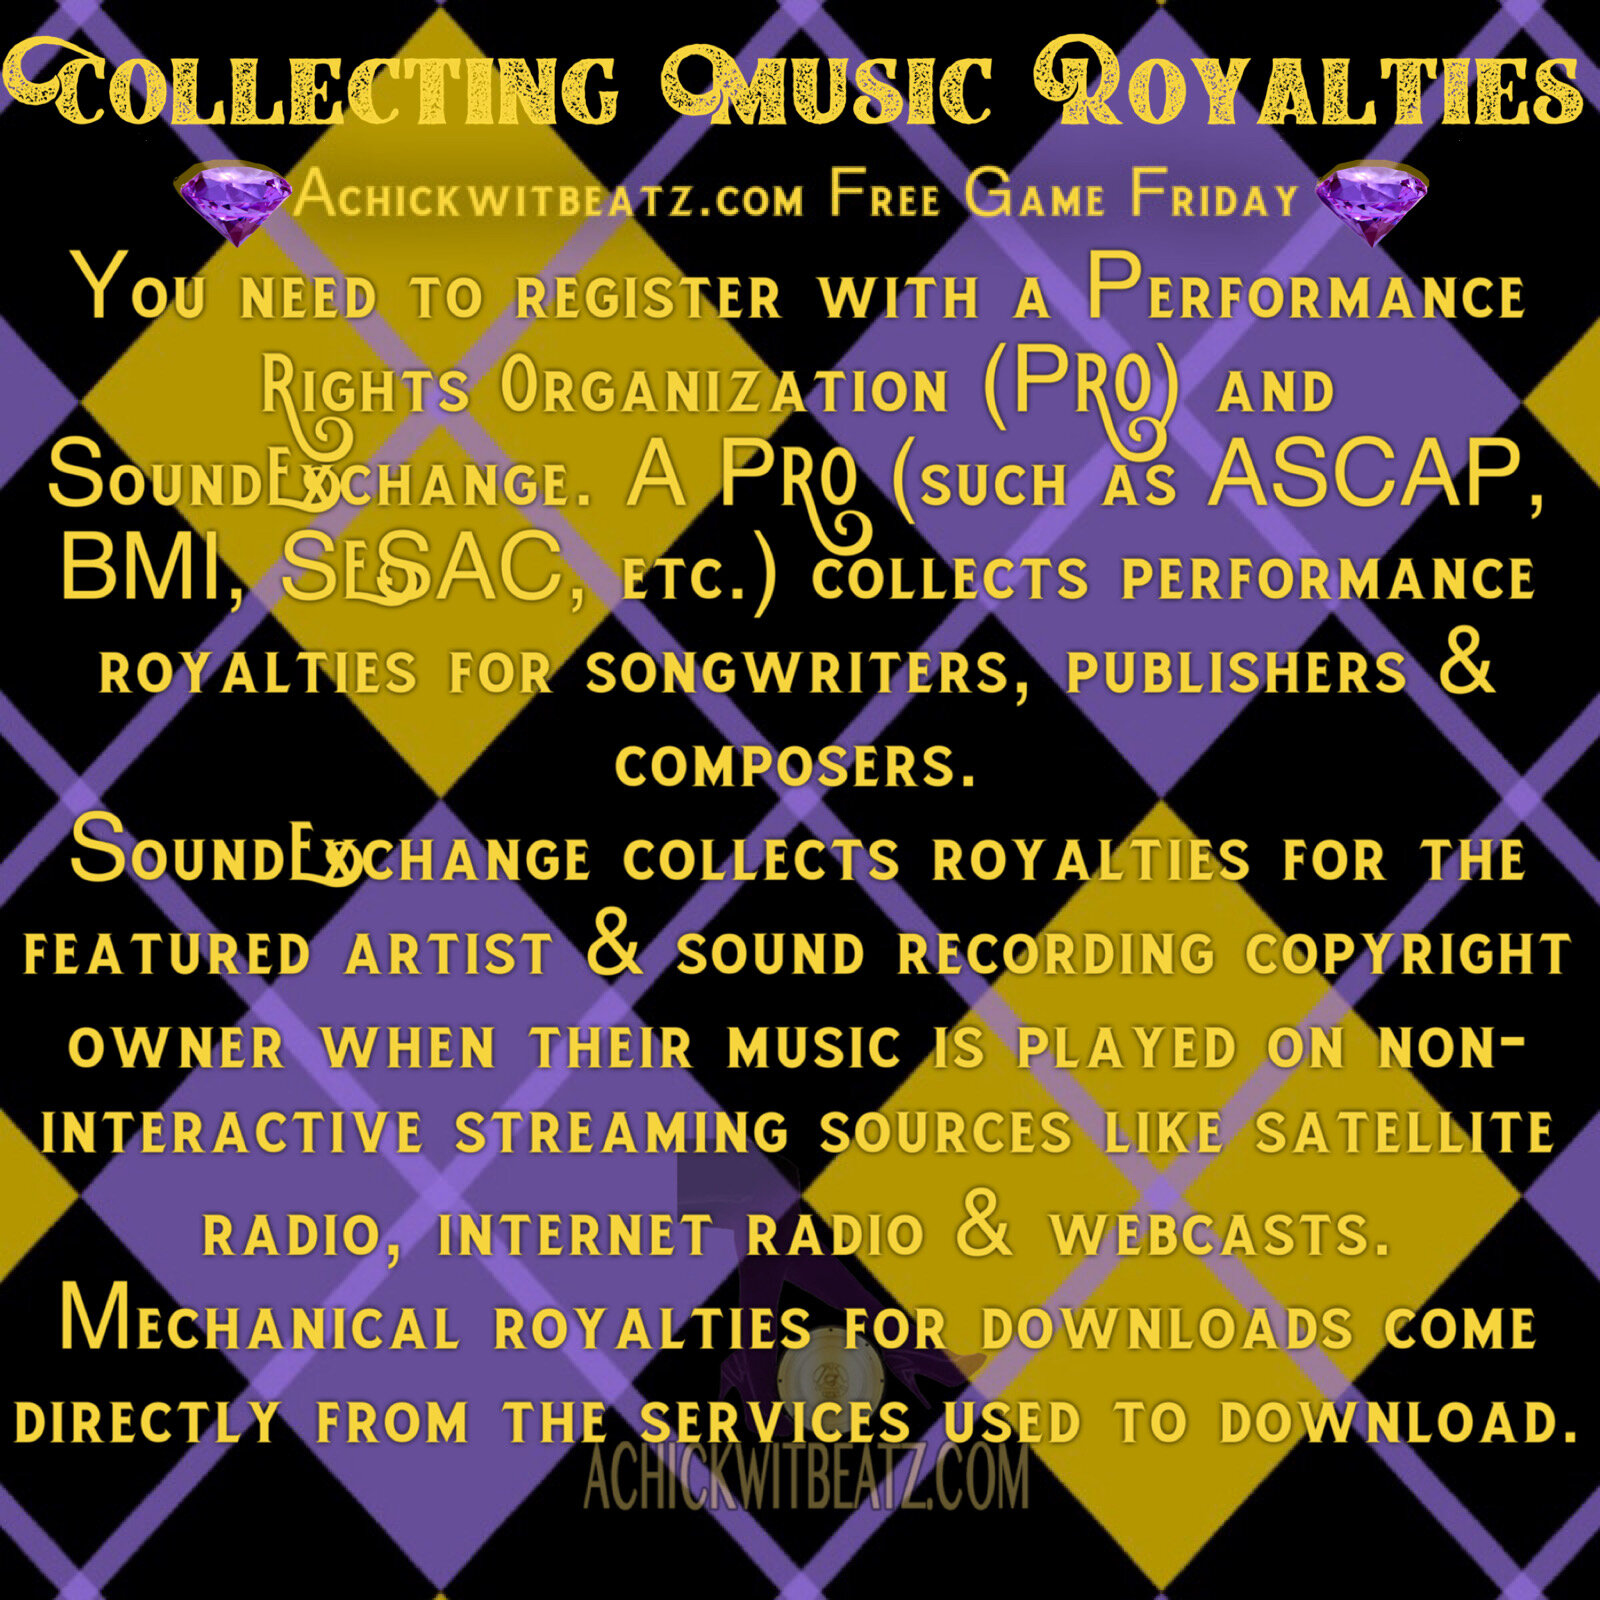 Free Game Friday: Collecting Music Royalties